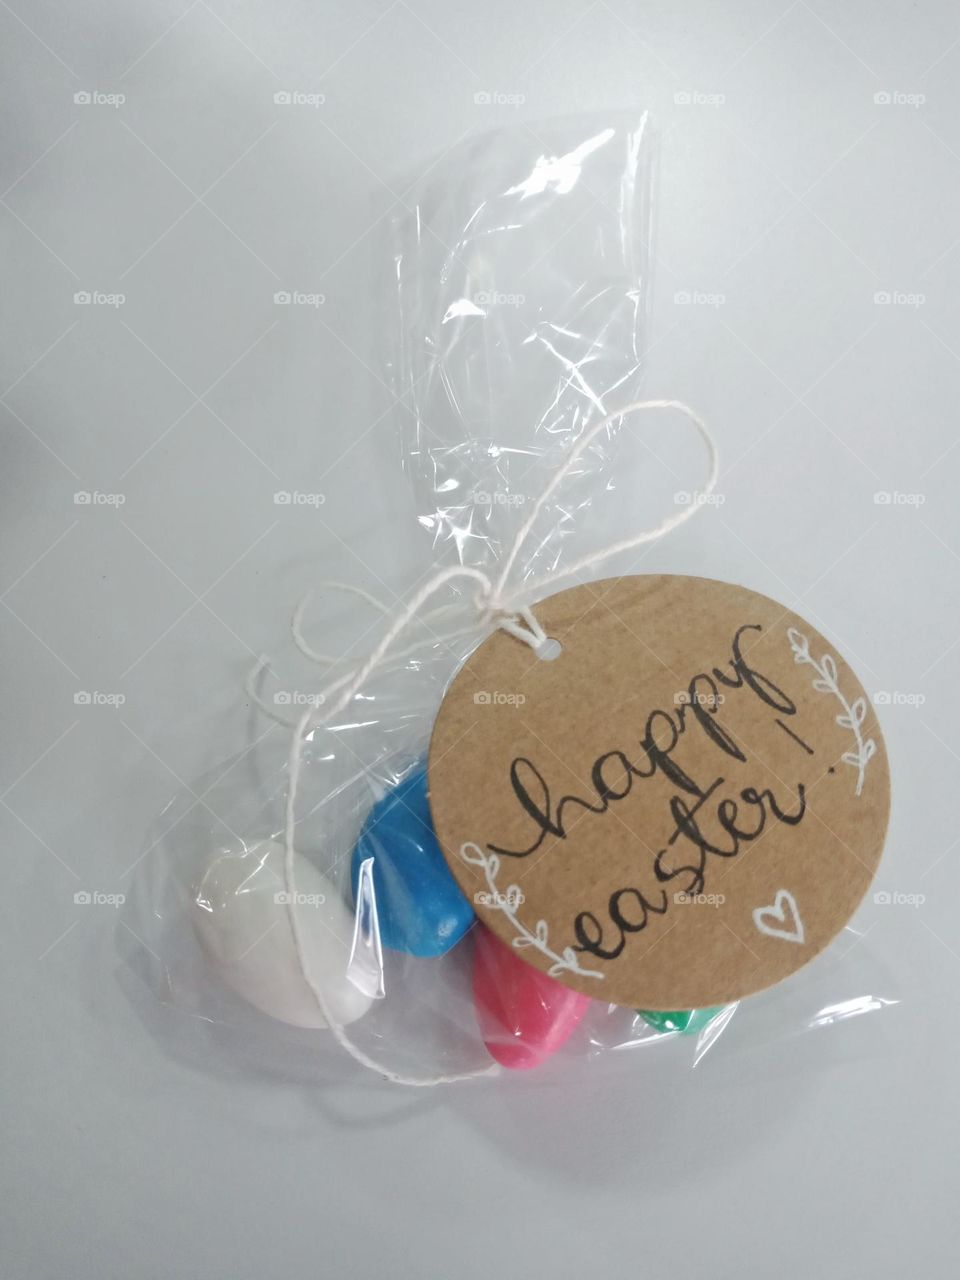 Sweet almonds for Easter. Handwritten tag card, on clear paper wrapping